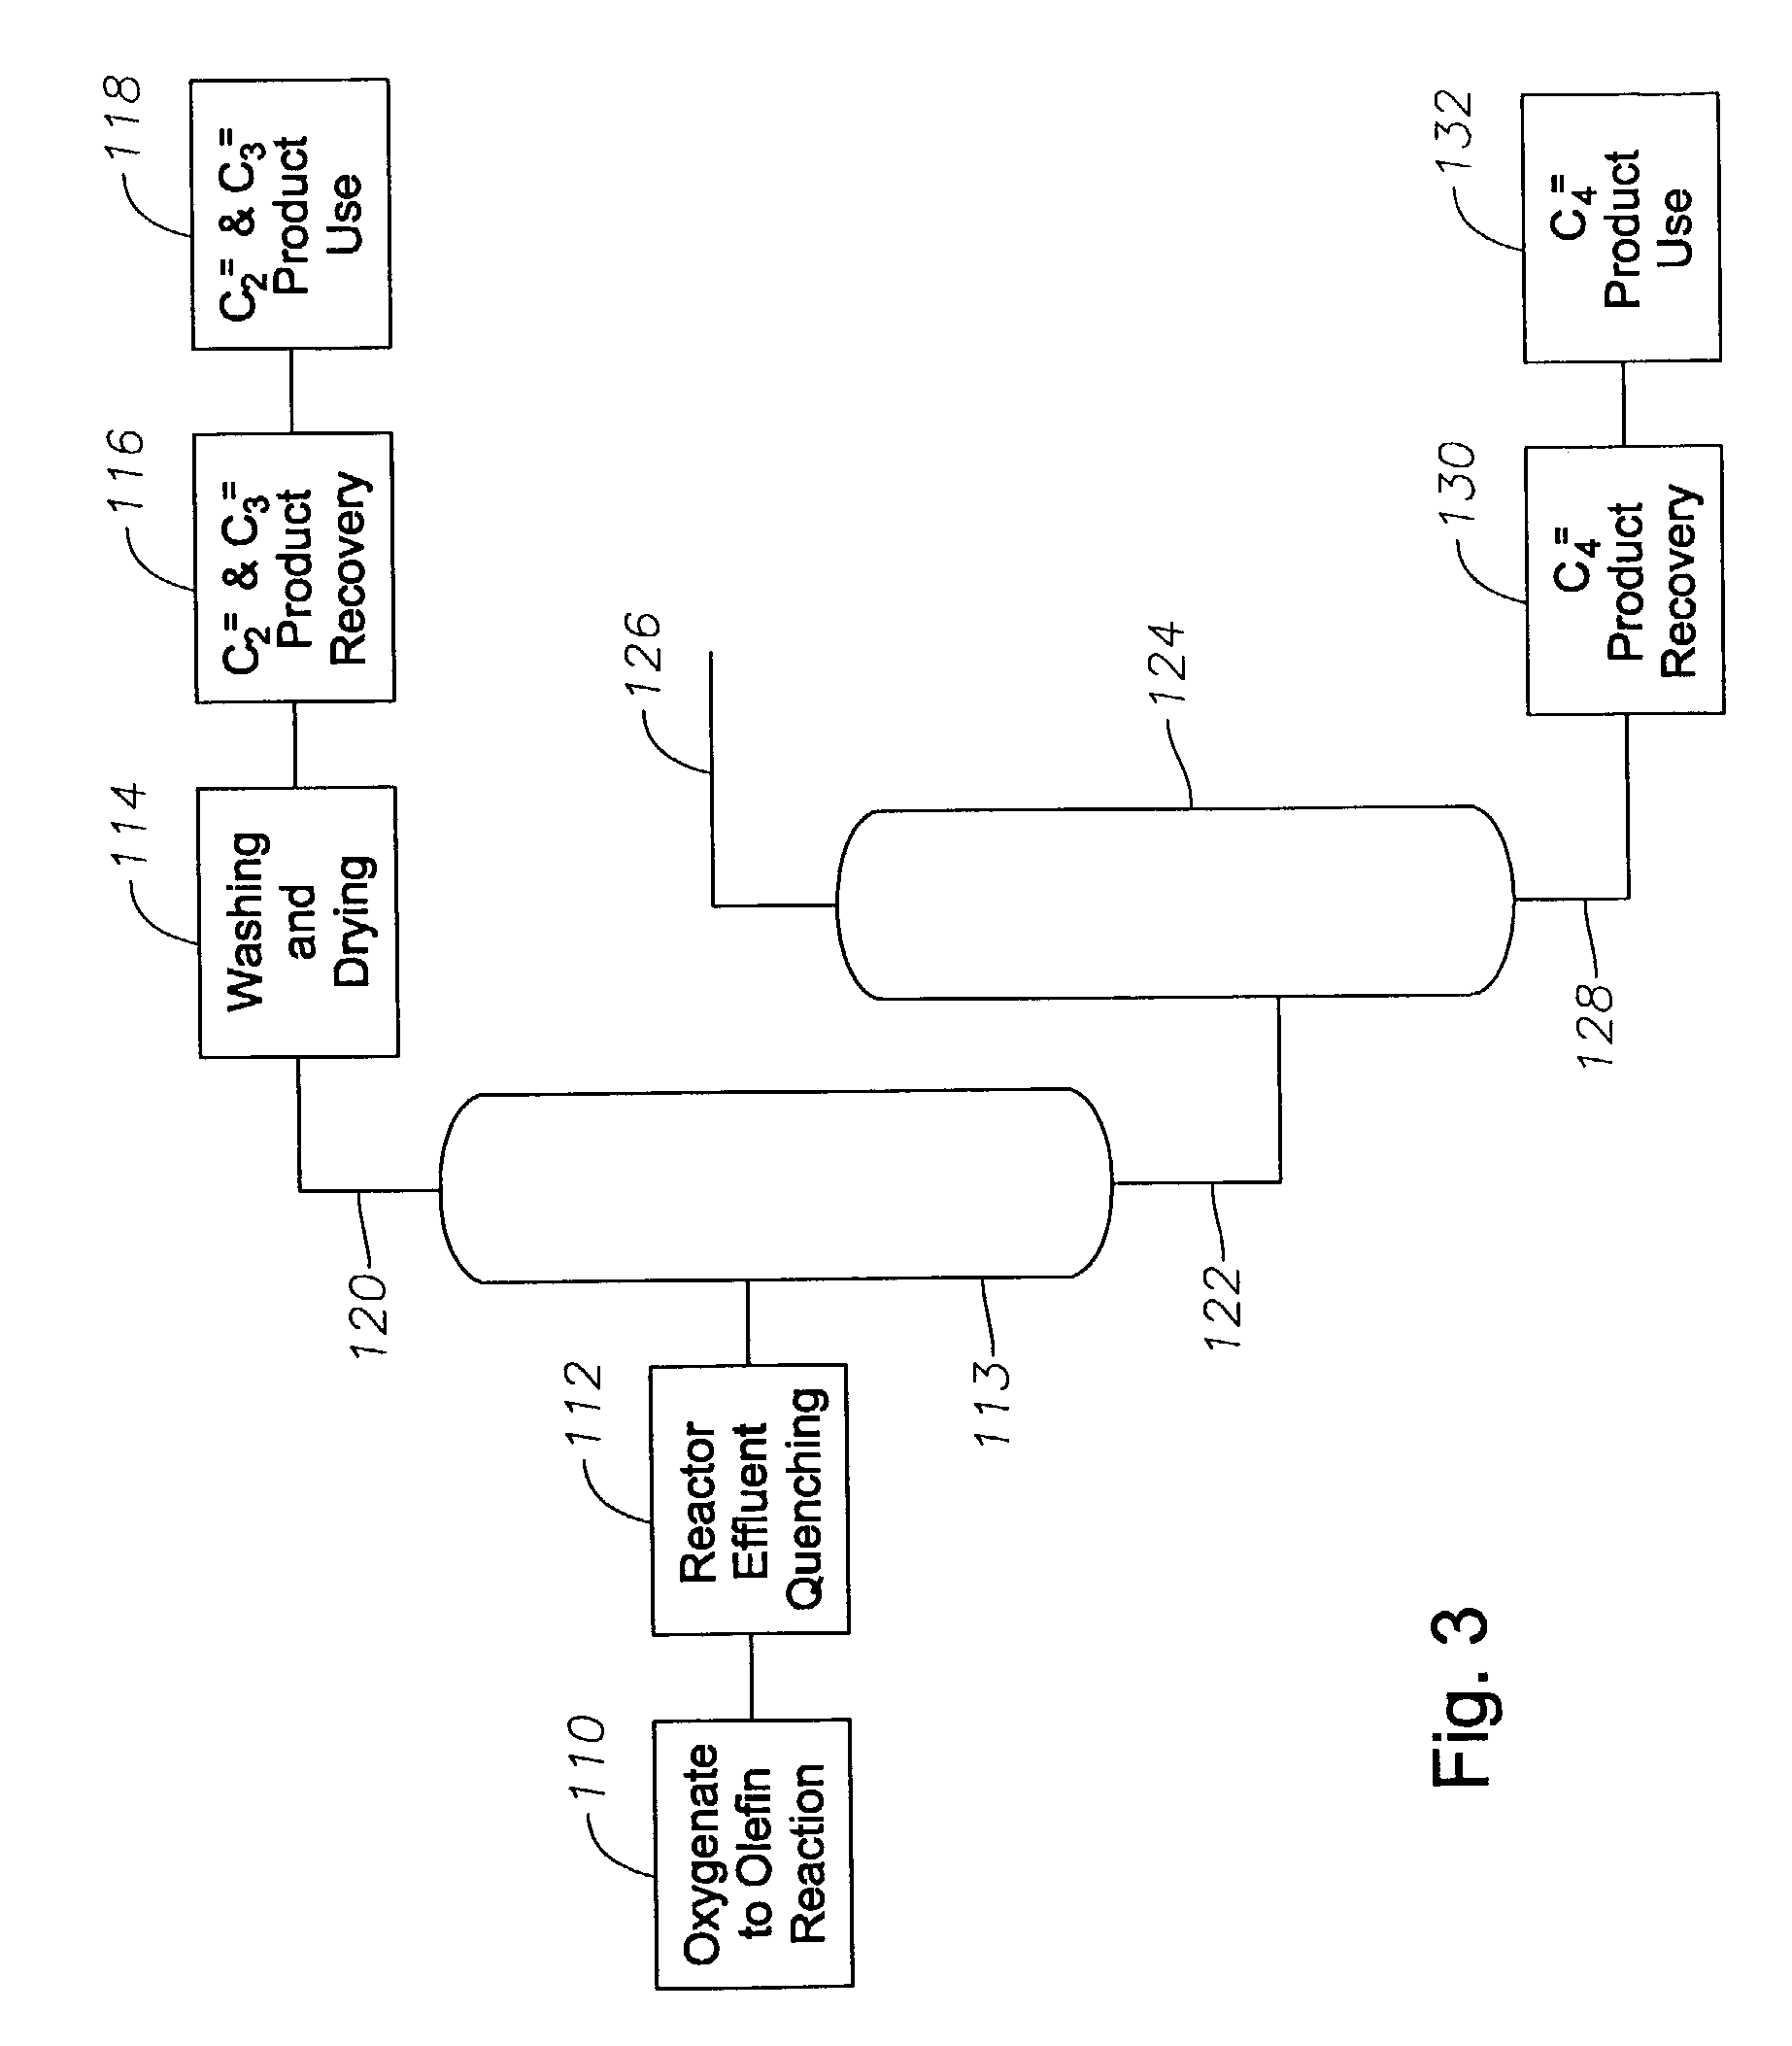 Distillation process for removal of methyl acetylene and/or propadiene from an olefin stream